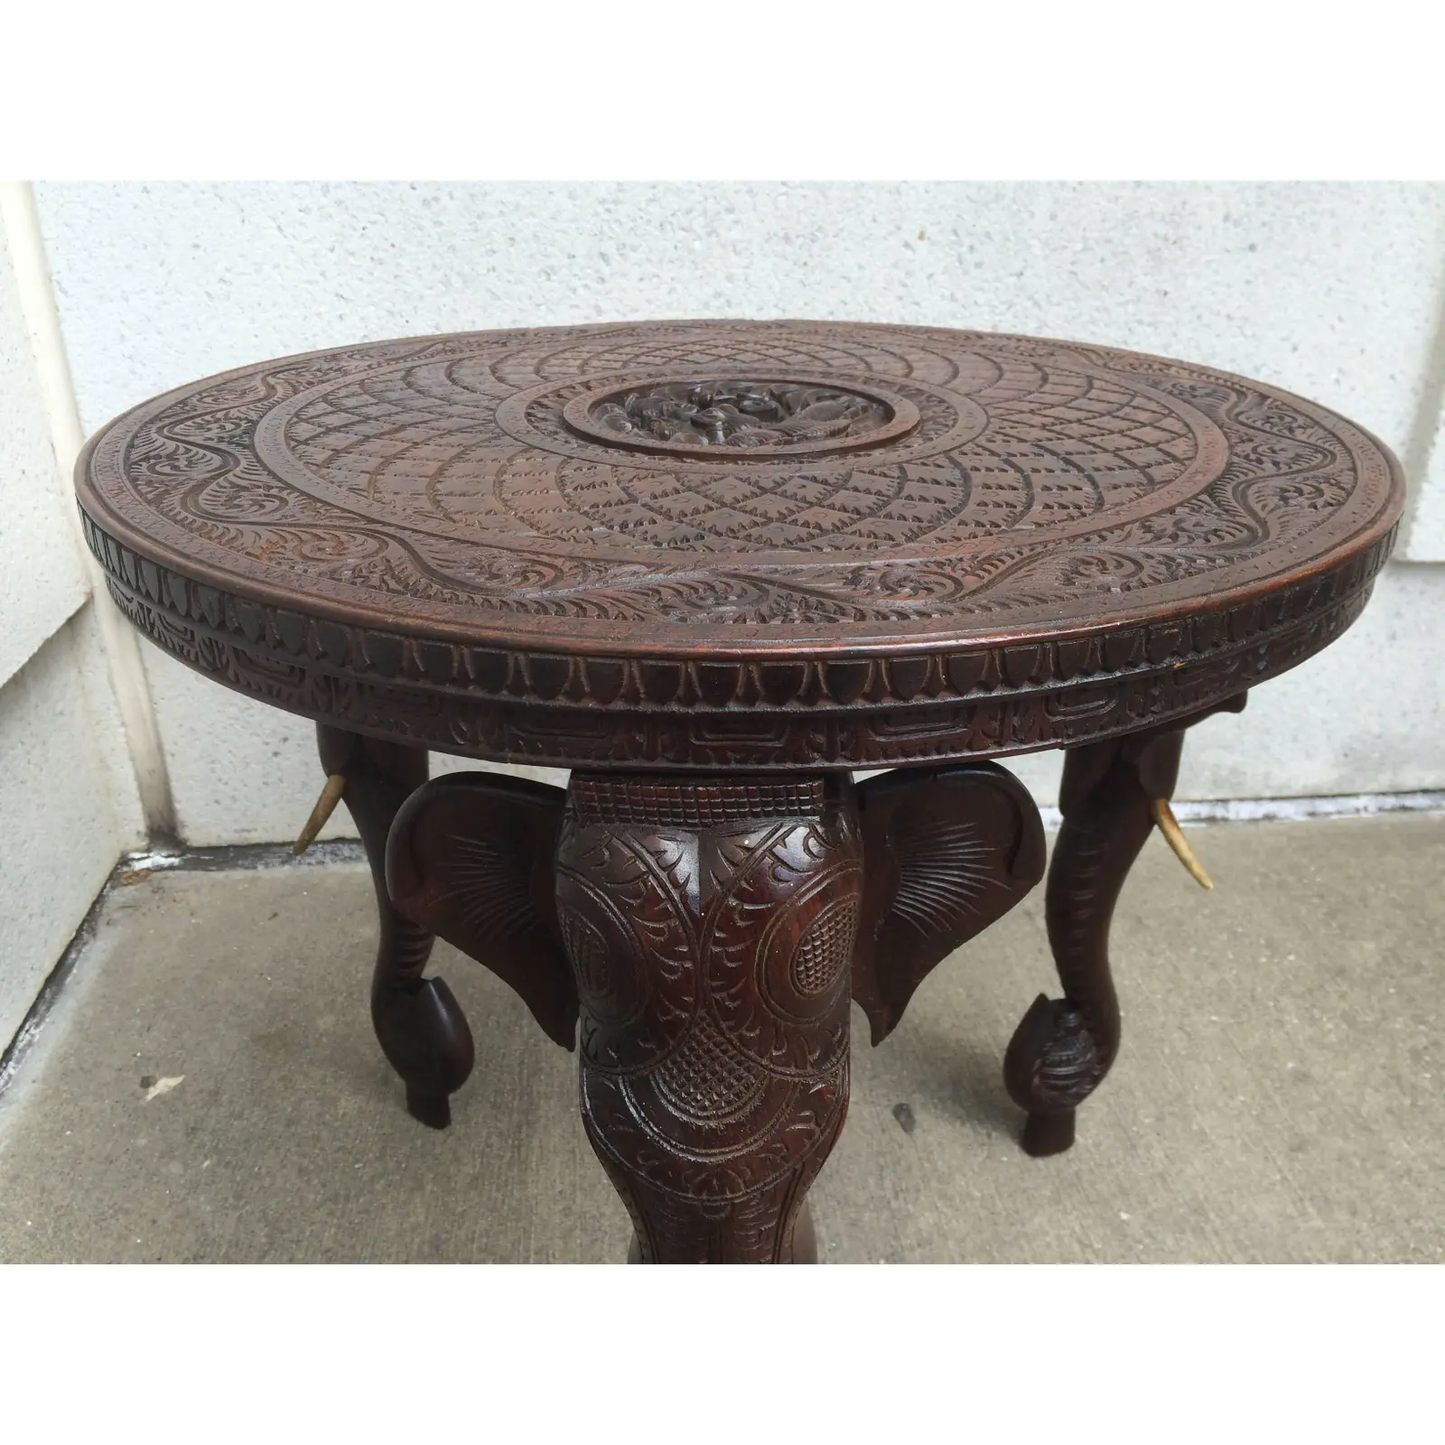 Elephant-Inspired Carved Nightstand: Exotic Elegance for Your Room